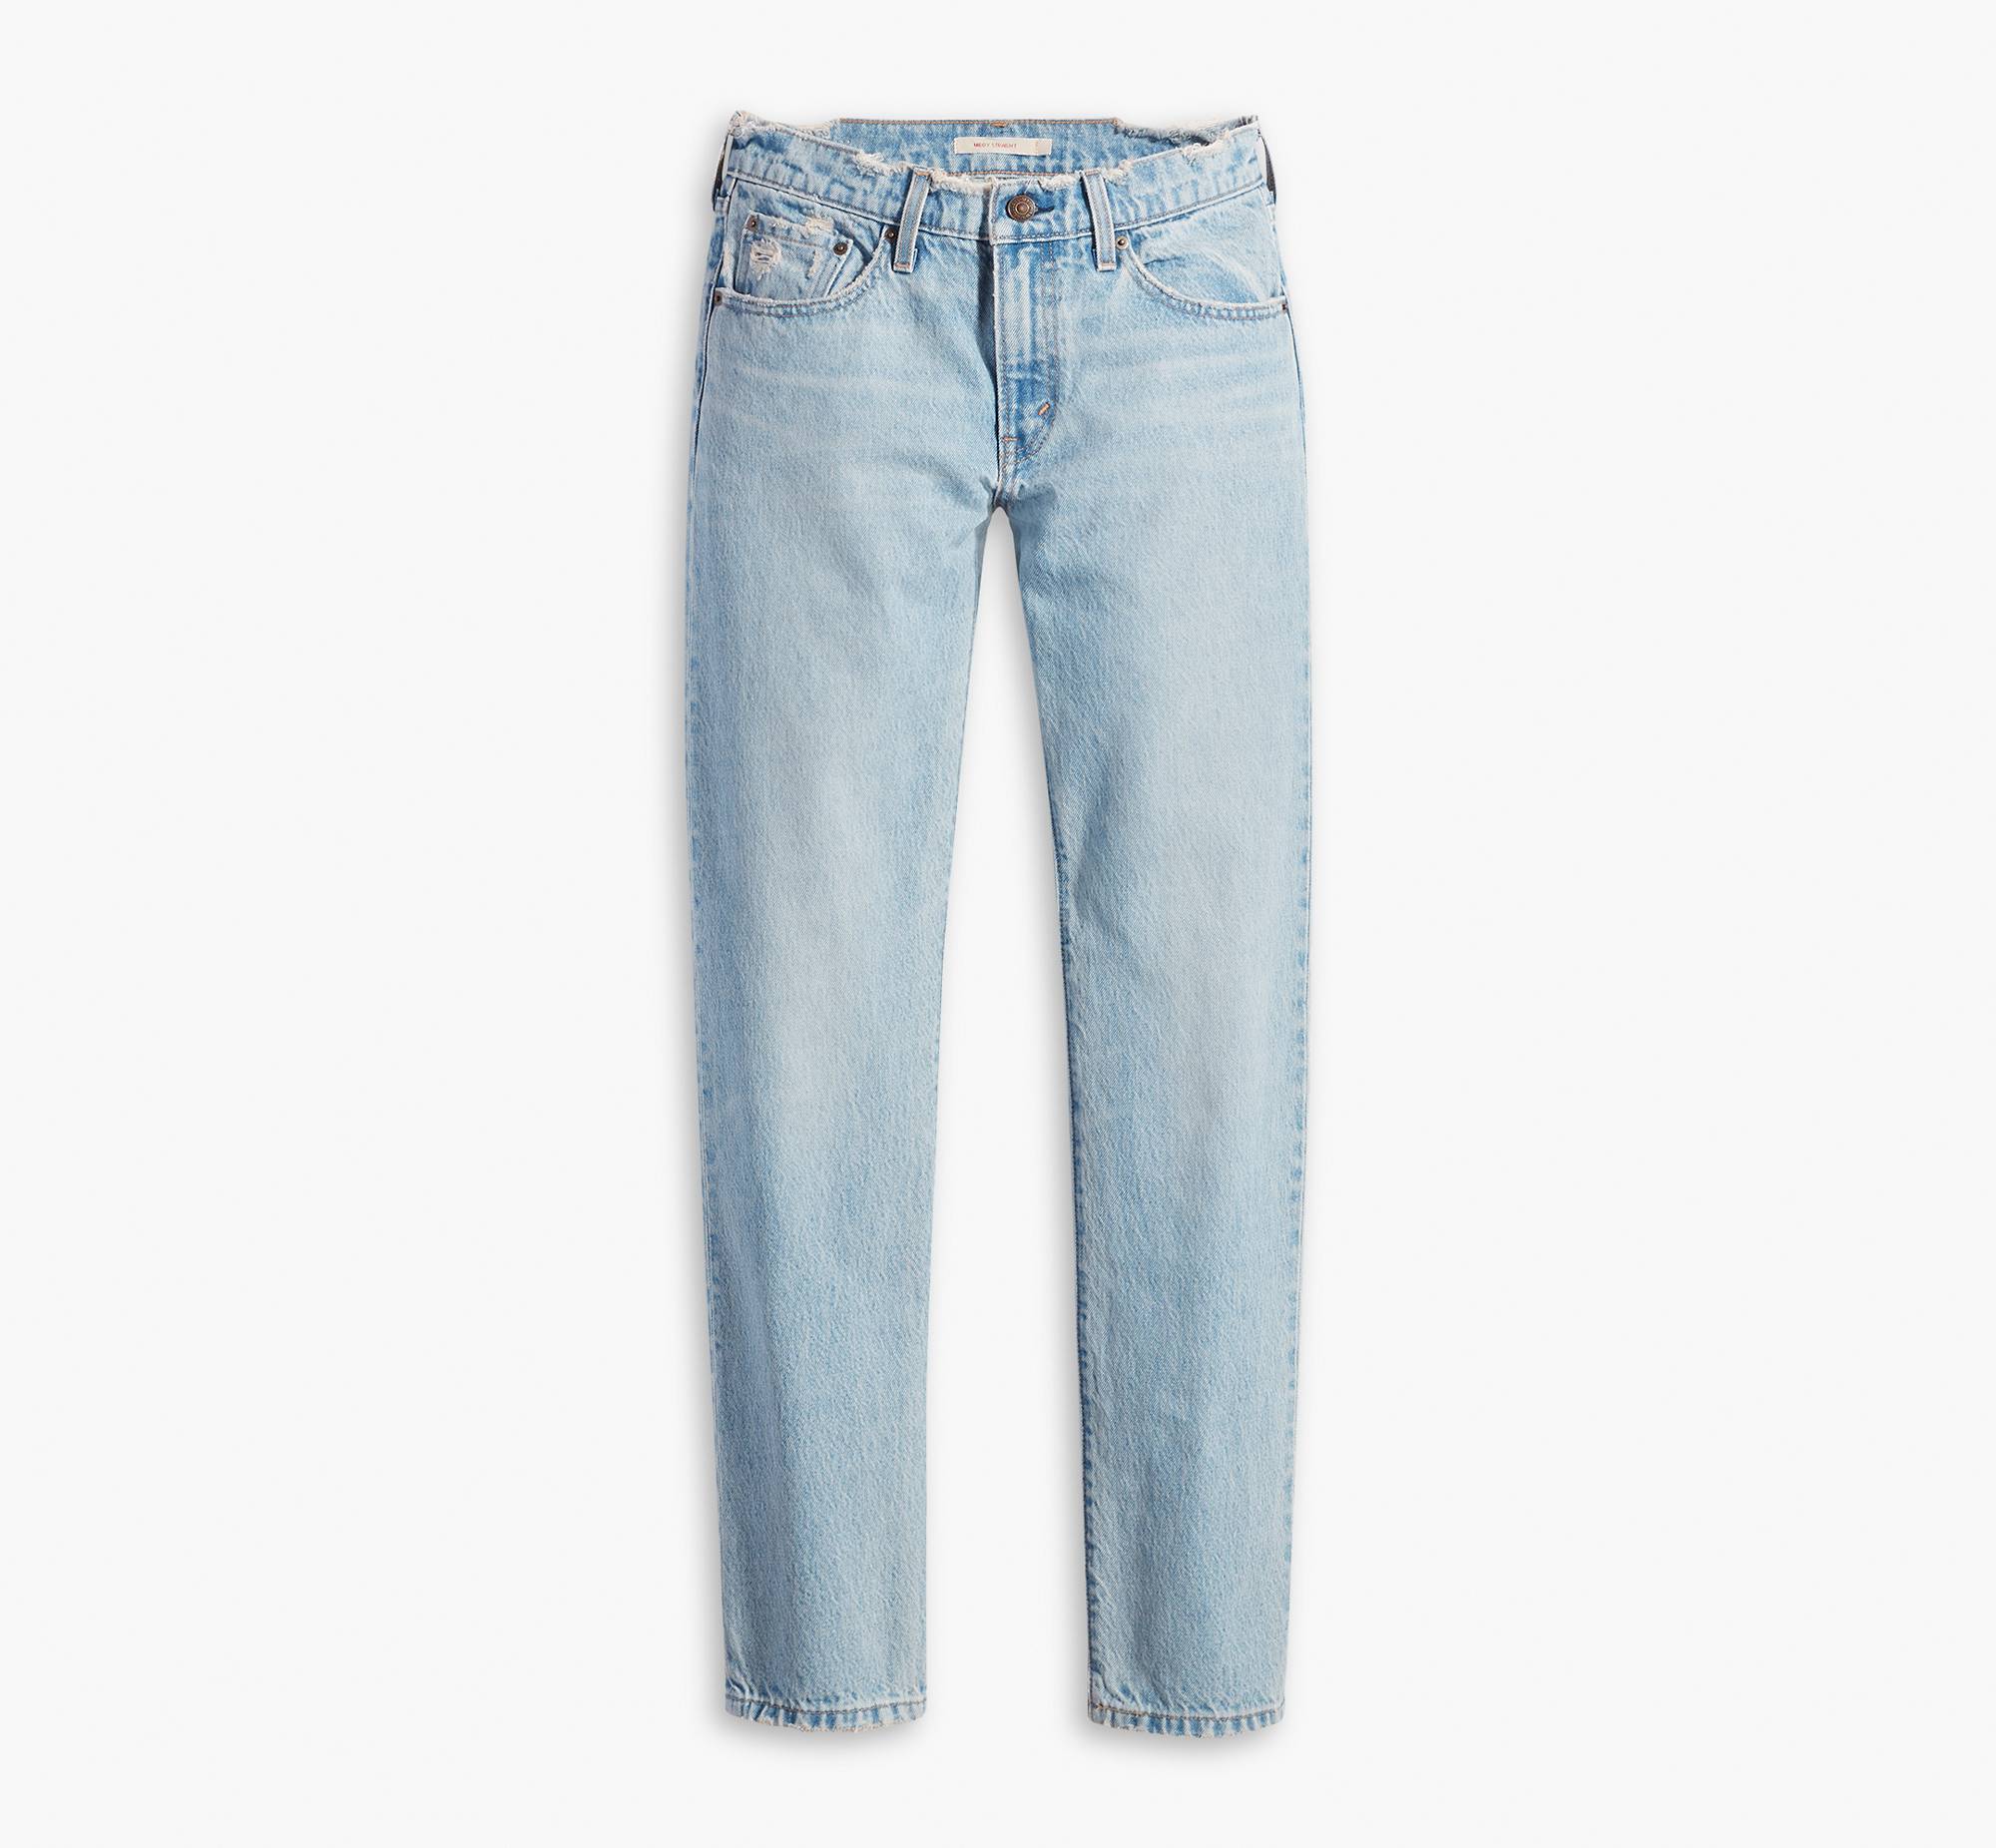 Middy Straight Jeans 6